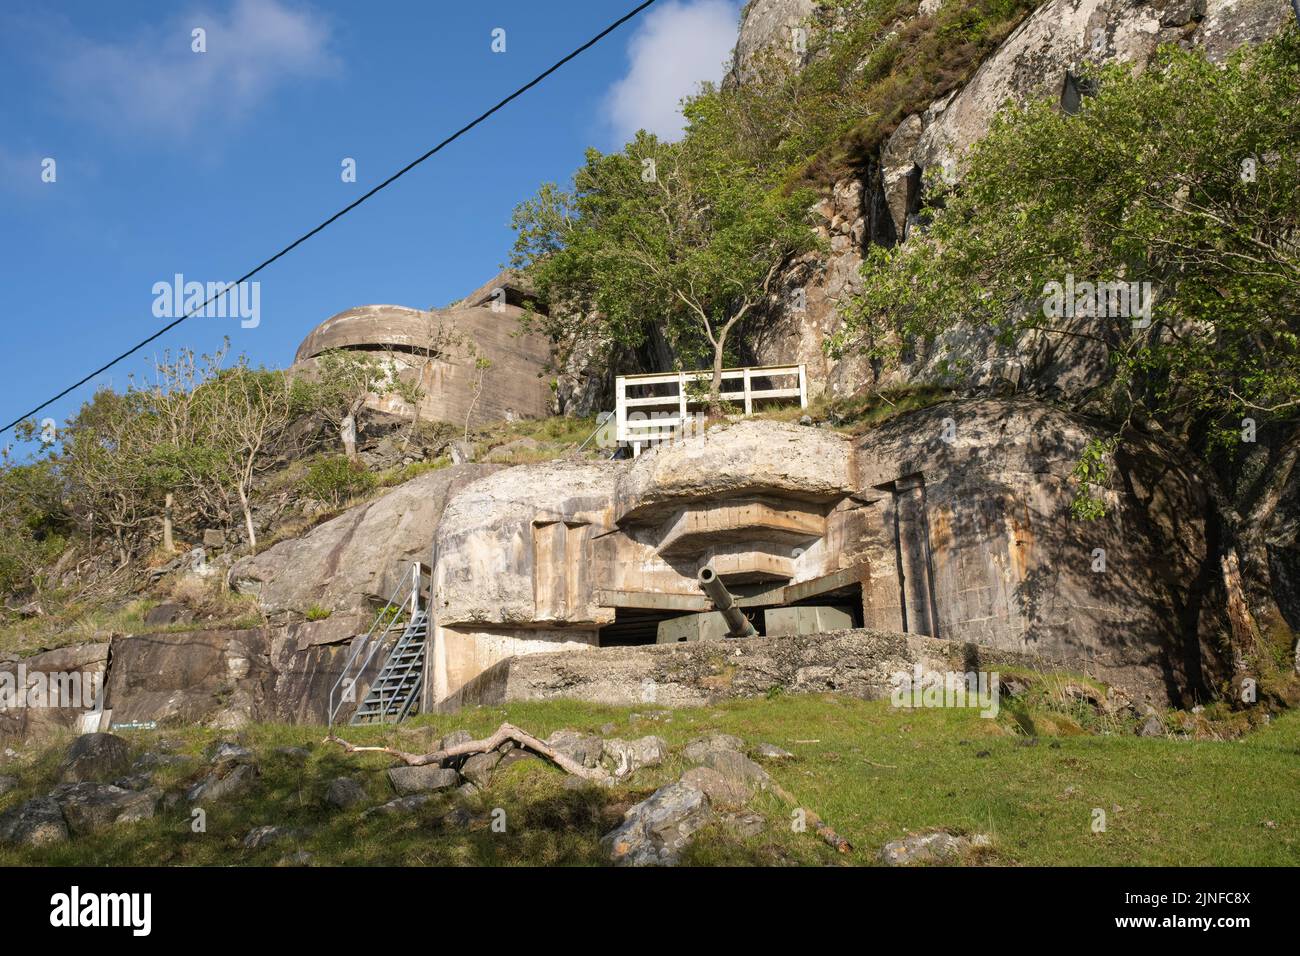 Vanse, Norway - May 30, 2022: Varnes Fort is an ex-German coastal battery a little east of Varnes lighthouse. The battery was set up with four 105mm a Stock Photo